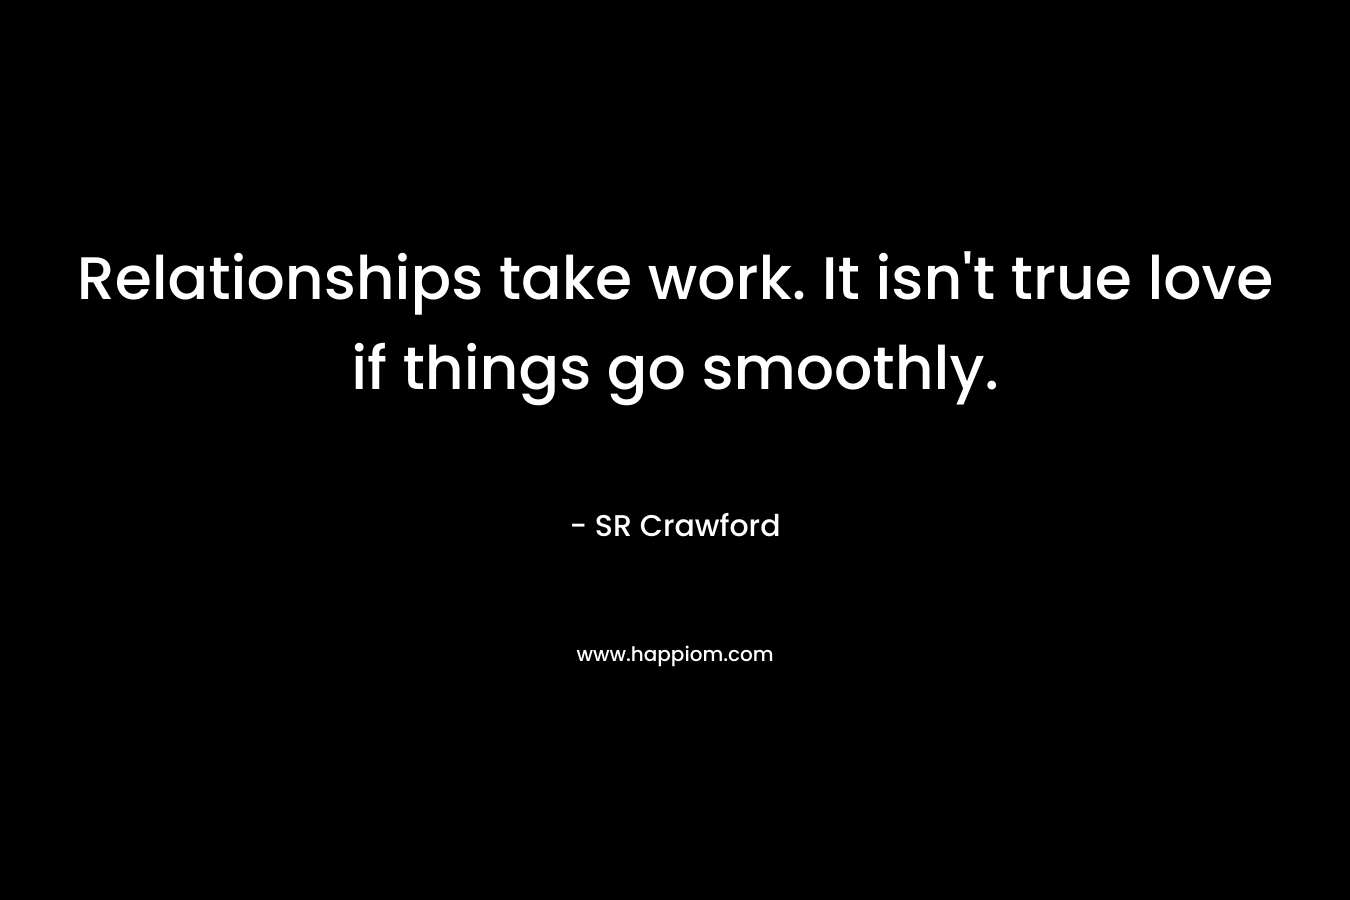 Relationships take work. It isn't true love if things go smoothly.